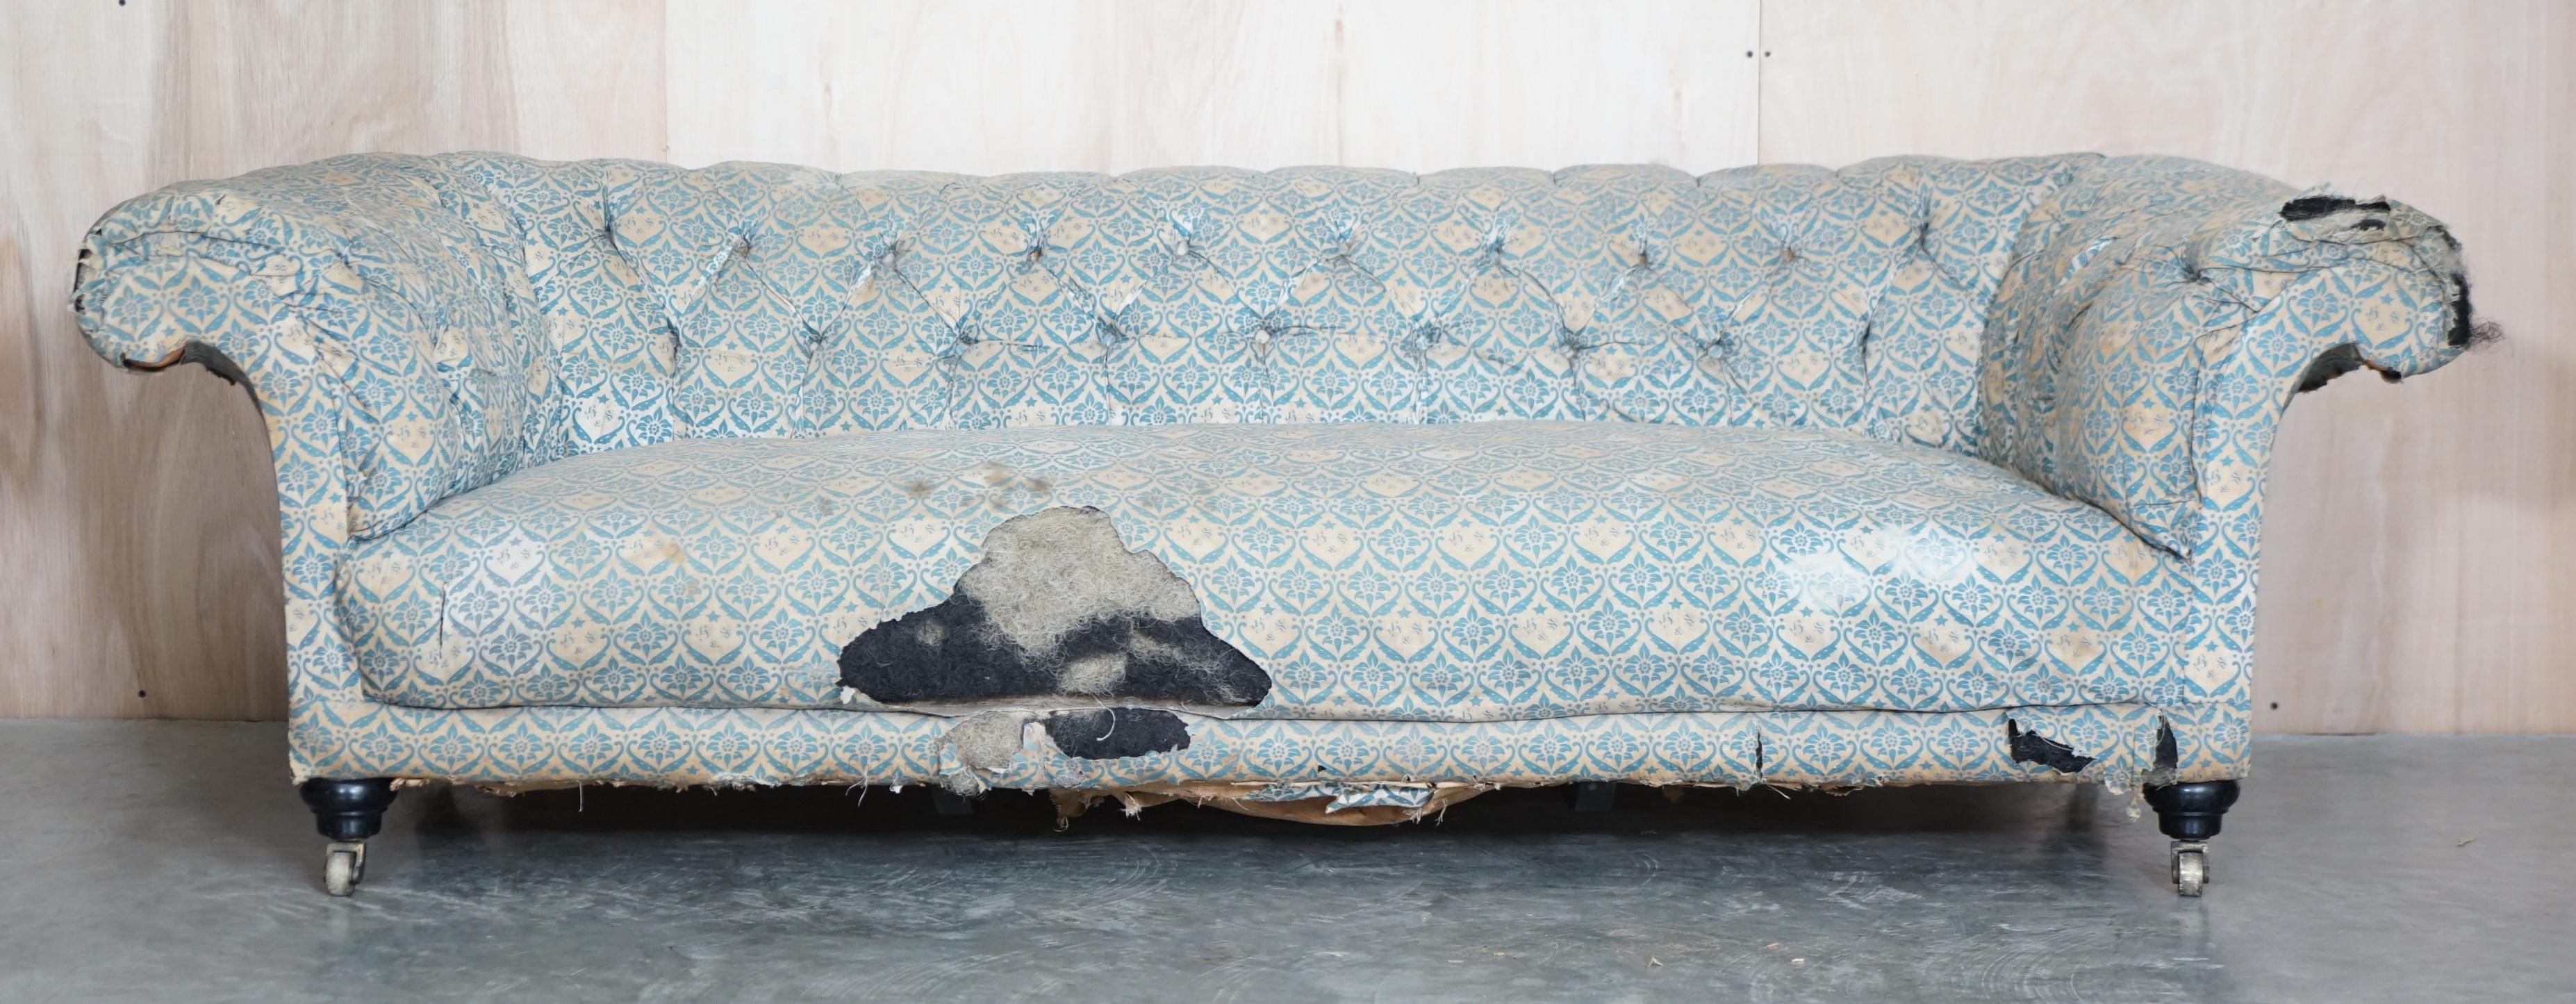 Hand-Crafted Unrestored Antique Victorian Howard & Son's Chesterfield Sofa Inc Ticking Fabric For Sale